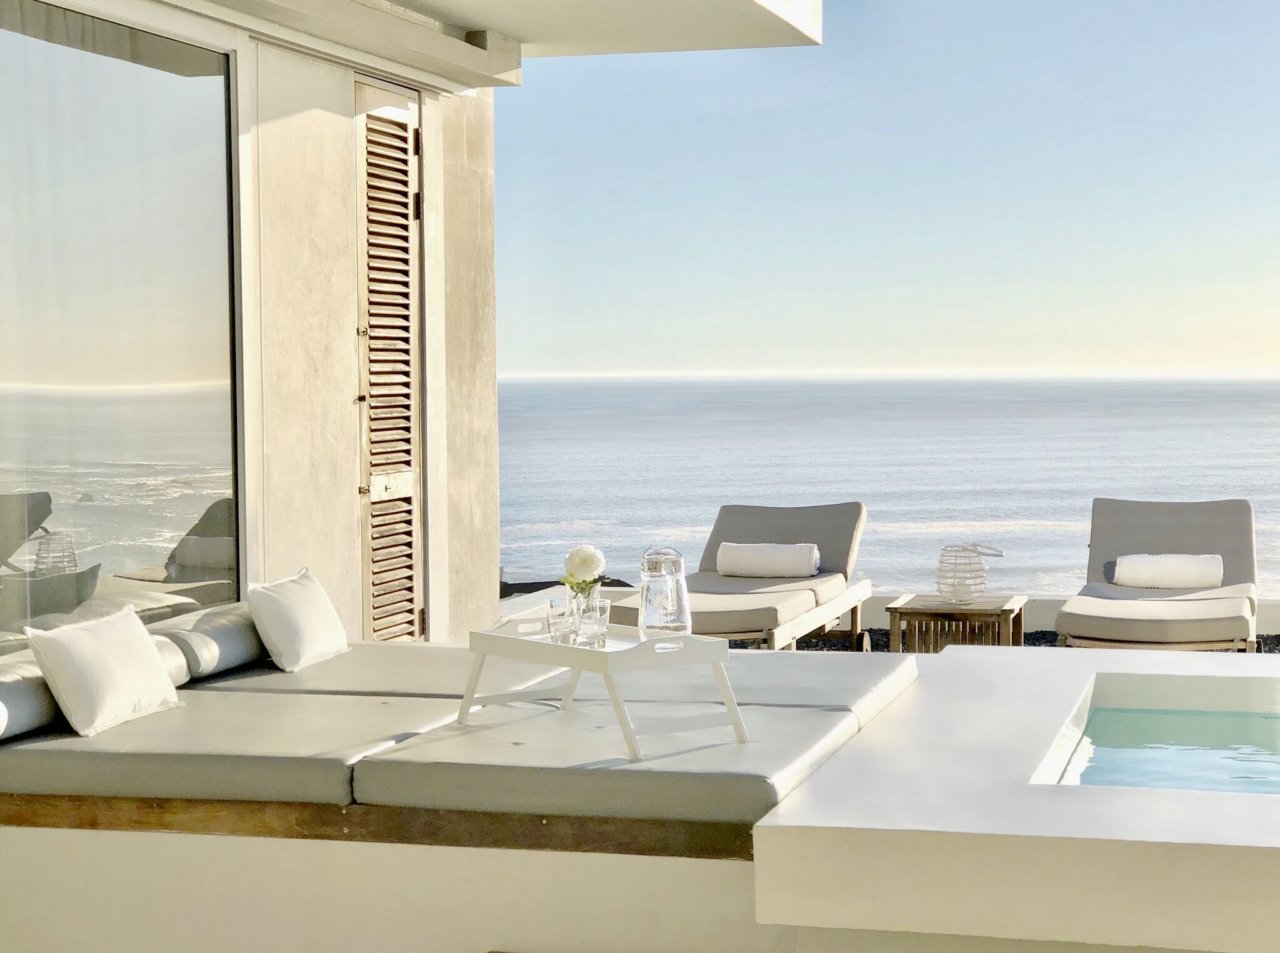 Photo 2 of Aqua Penthouse accommodation in Camps Bay, Cape Town with 2 bedrooms and 2 bathrooms